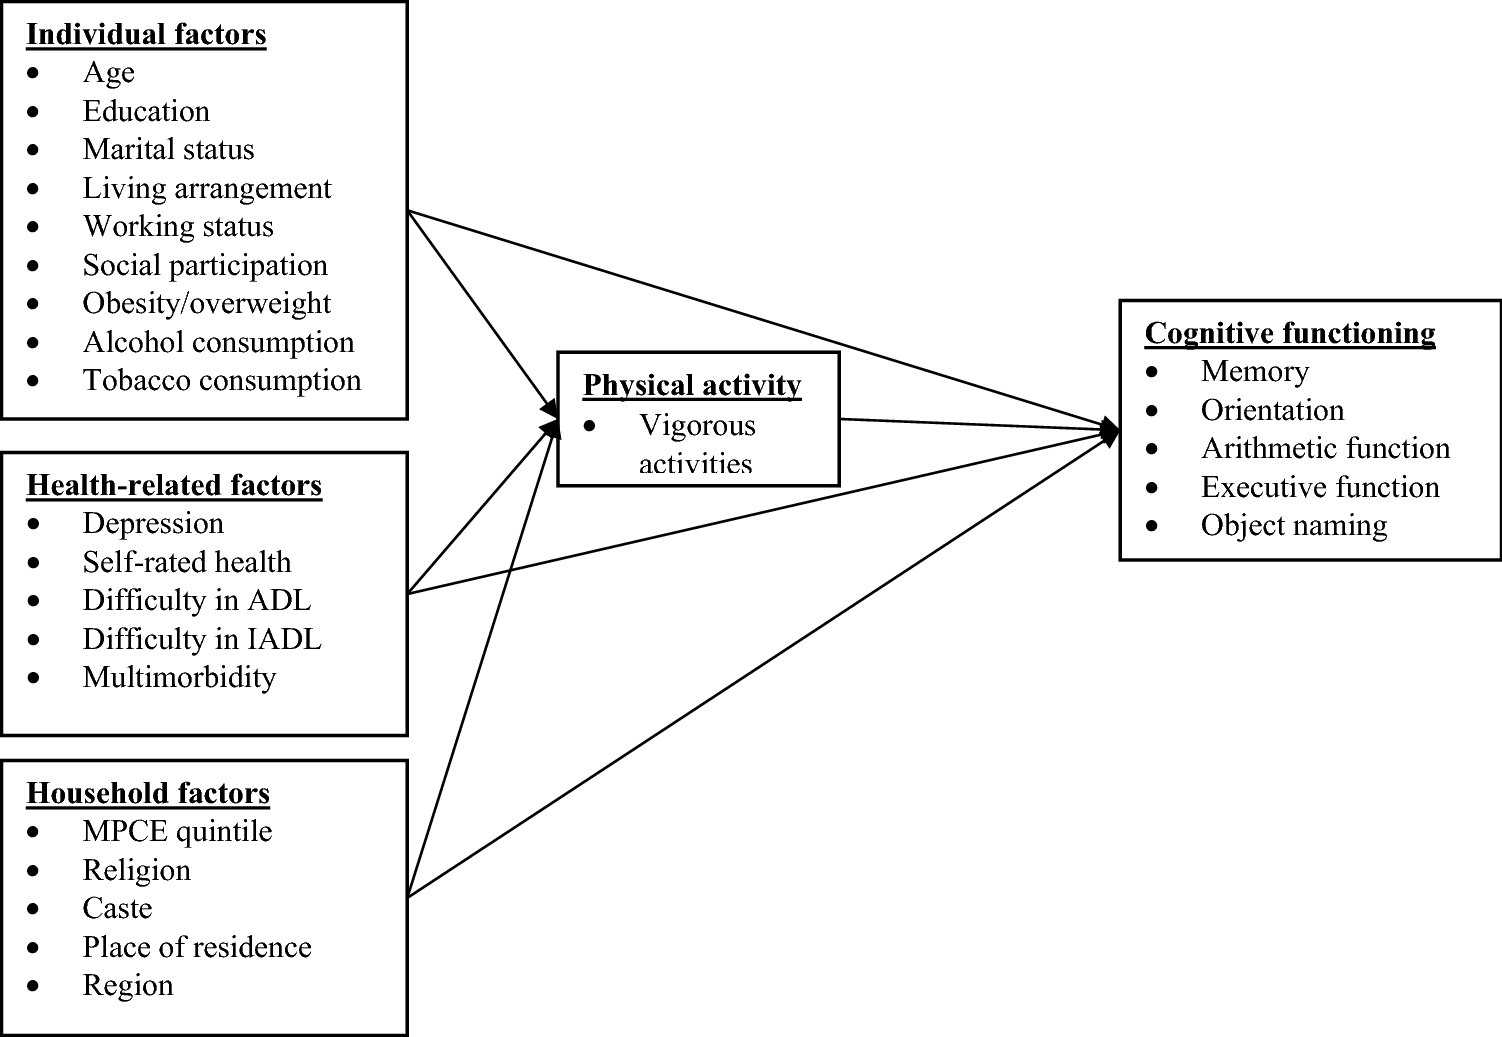 Relationship between physical activity and cognitive functioning among  older Indian adults